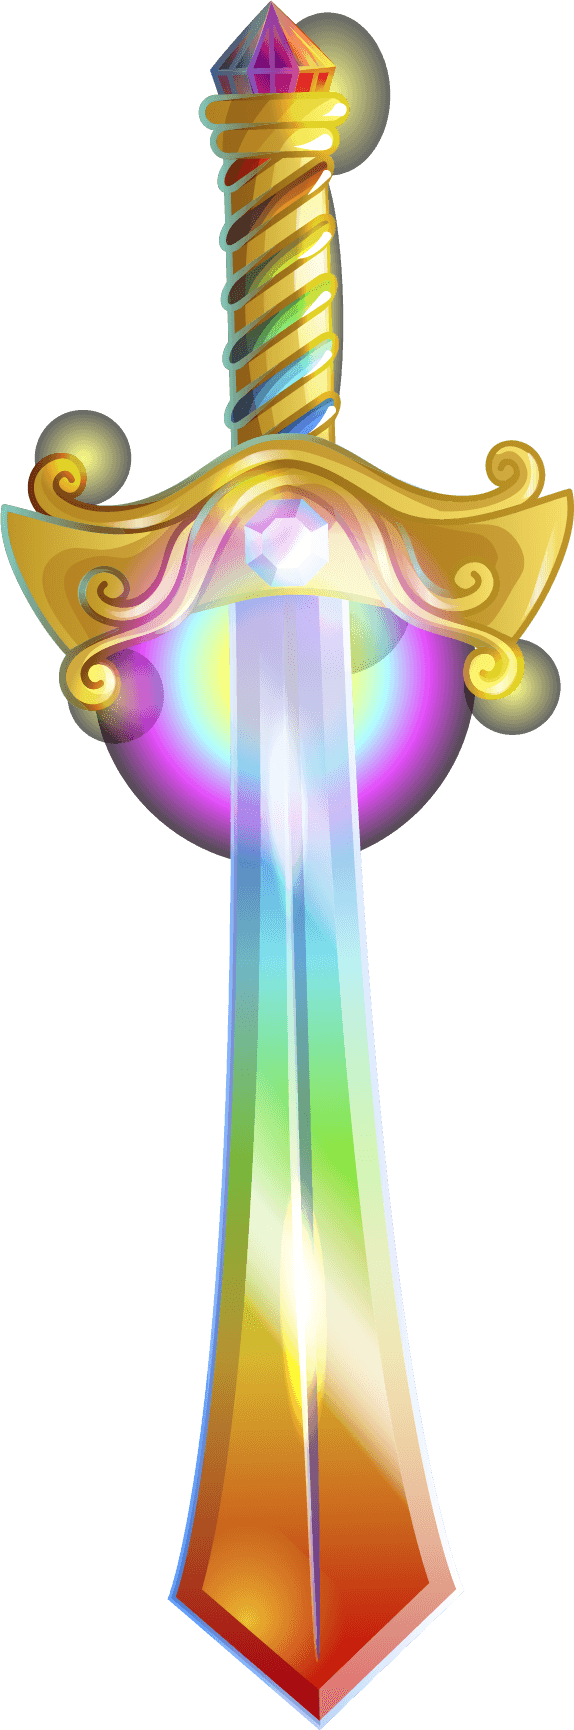 beautiful sword god cartoon game elements template with shield swords sabres daggers